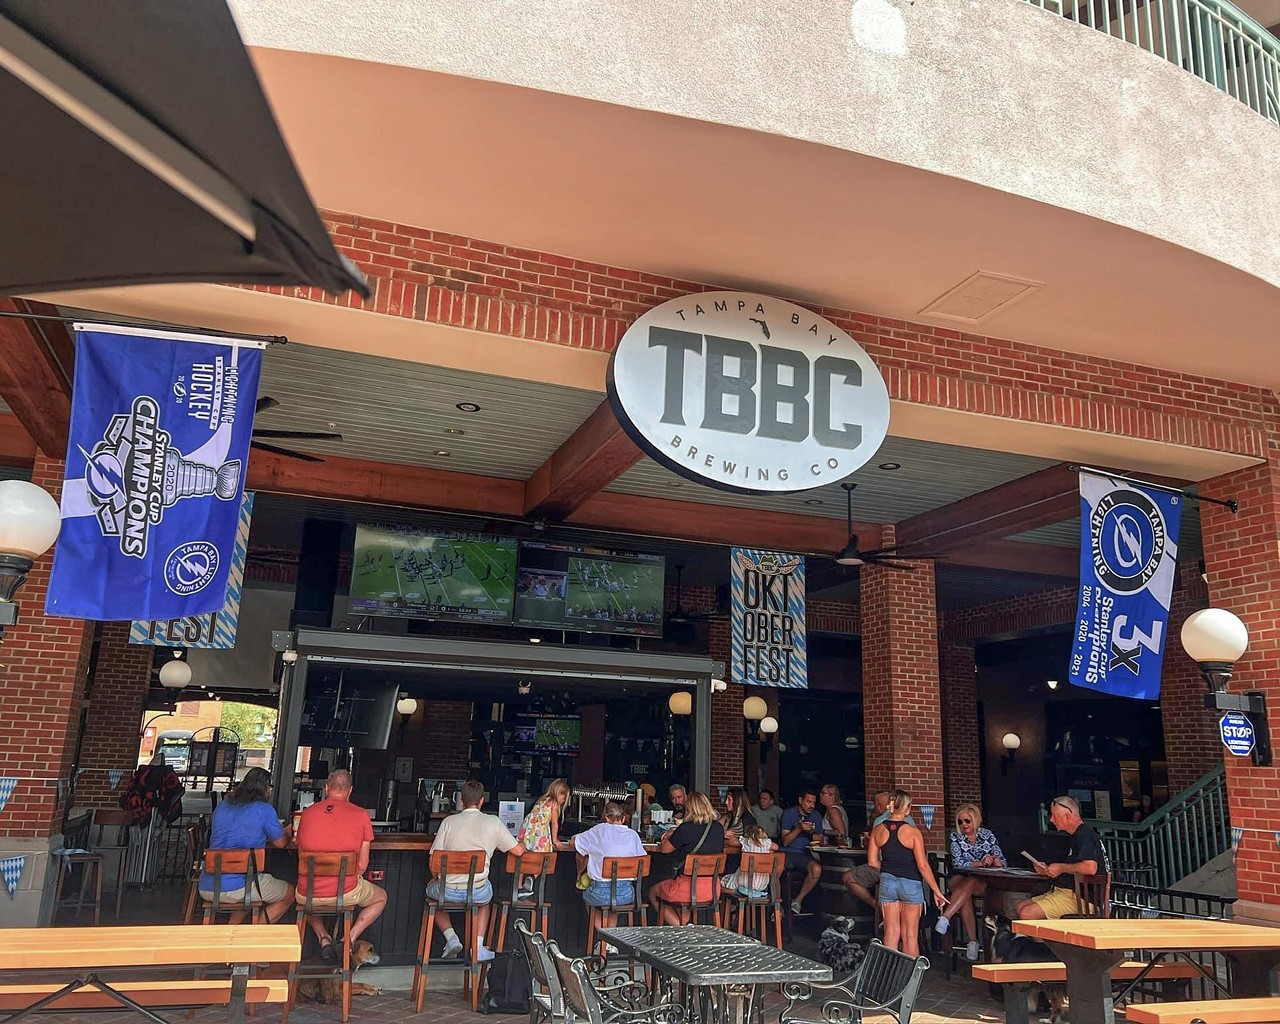 Tampa Bay Brewing Co.
Come for the game, stay for the brews and tasty bar grub. Located in the heart of Ybor City (right next to a streetcar stop, aka the ultimate designated driver), Tampa Bay Brewing Co. offers a comfortable place to watch the game and have dinner before heading home or continuing the party elsewhere in Ybor. Its second location in Westchase (13937 Monroes Business Park) also offers the same variety of craft beer and casual fare, too. 
1600 E 8th Ave., Ybor City